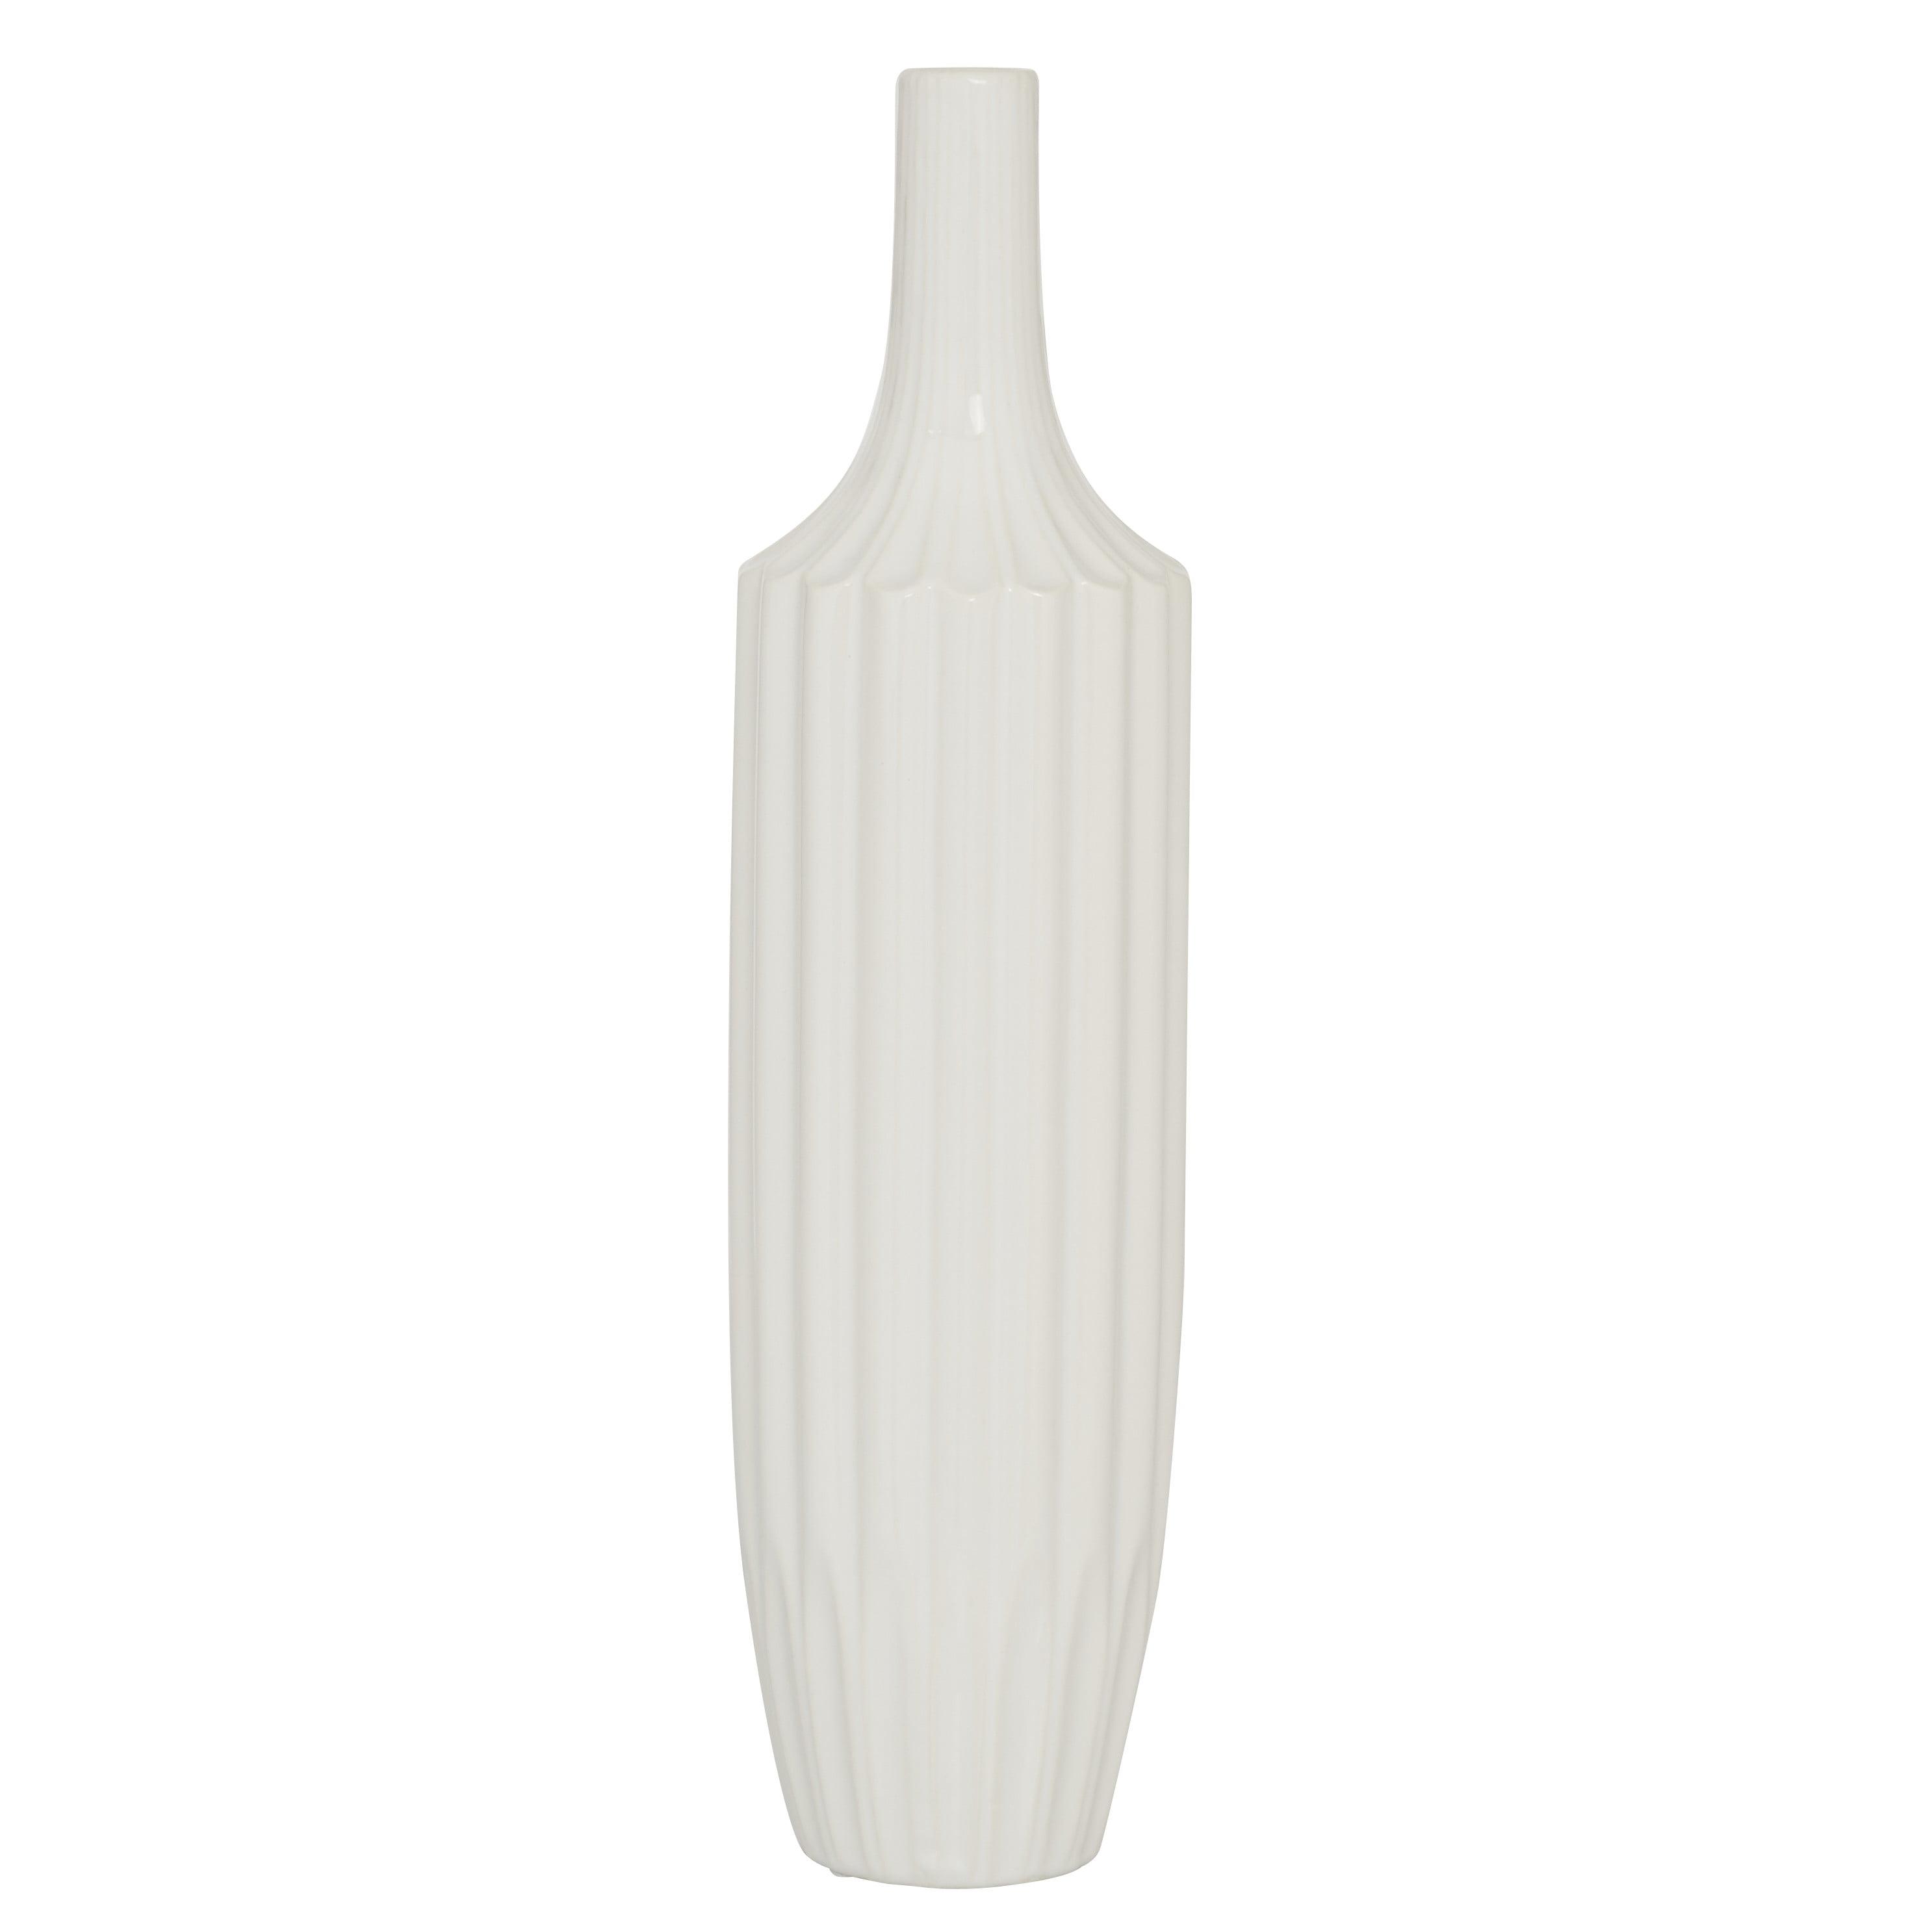 Ceramic Elegance 19" Tall Bud Vase with Vertical Groove Detail in Glossy White